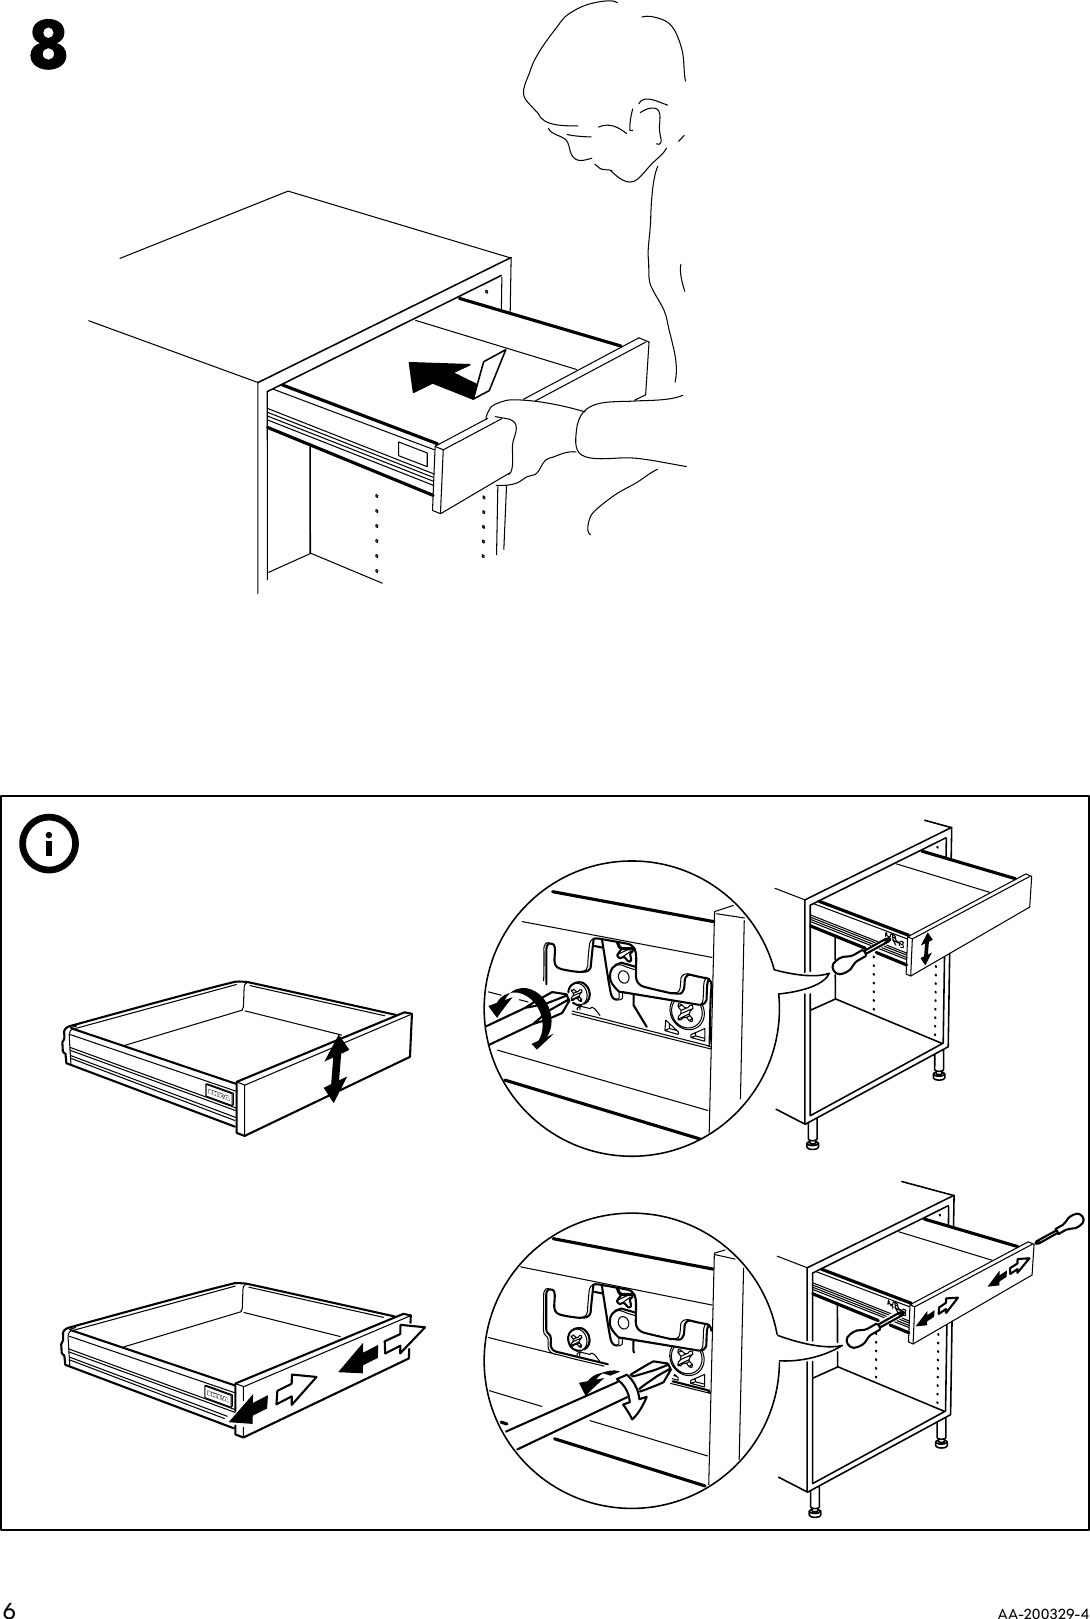 Page 6 of 8 - Ikea Ikea-Rationell-Full-Extending-Drawer-15-Assembly-Instruction